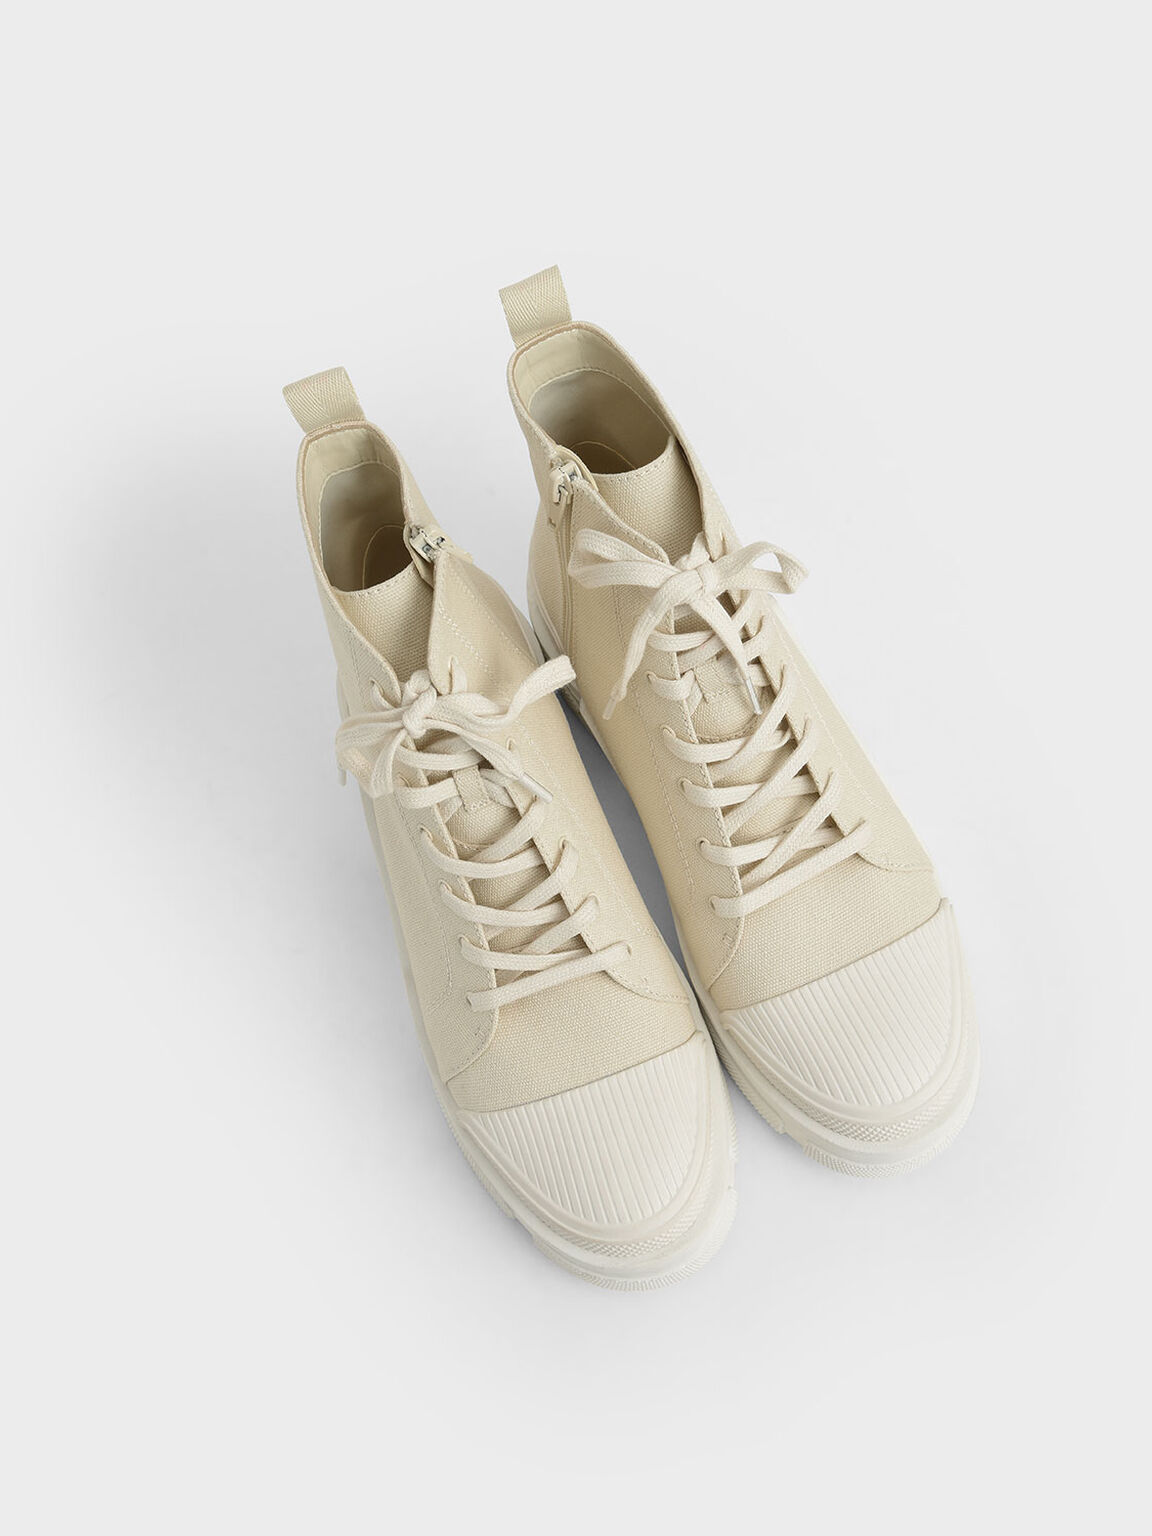 Canvas High Top Sneakers, Chalk, hi-res